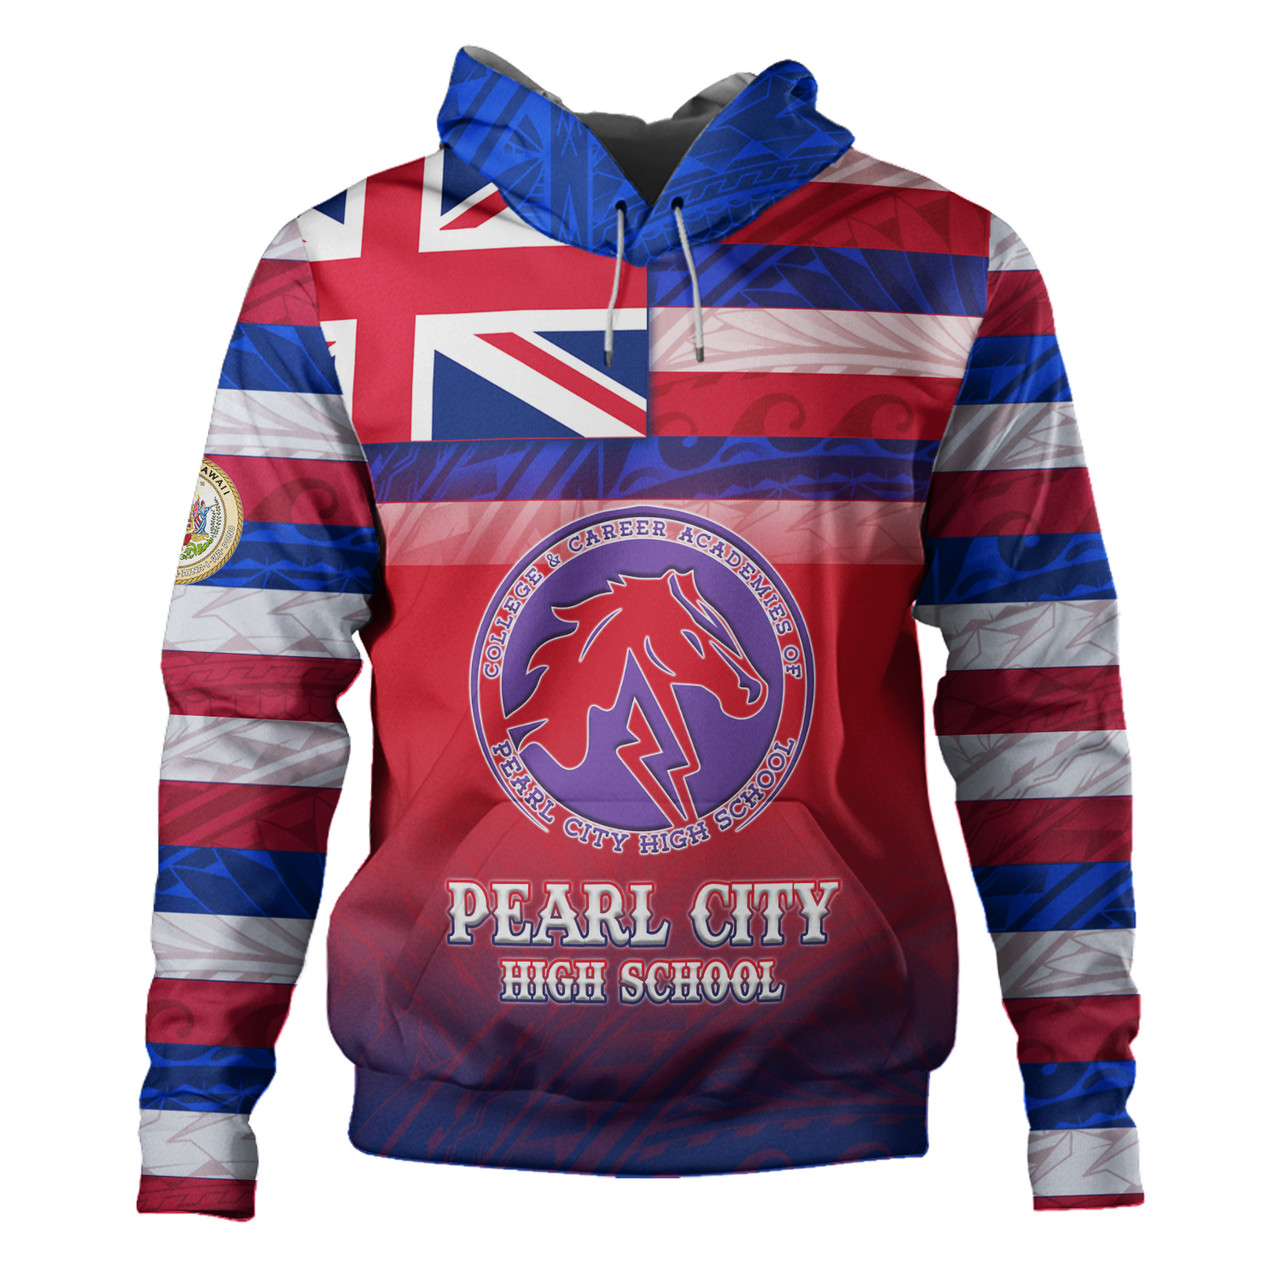 Hawaii Pearl City High School Hoodie Flag Color With Traditional Patterns